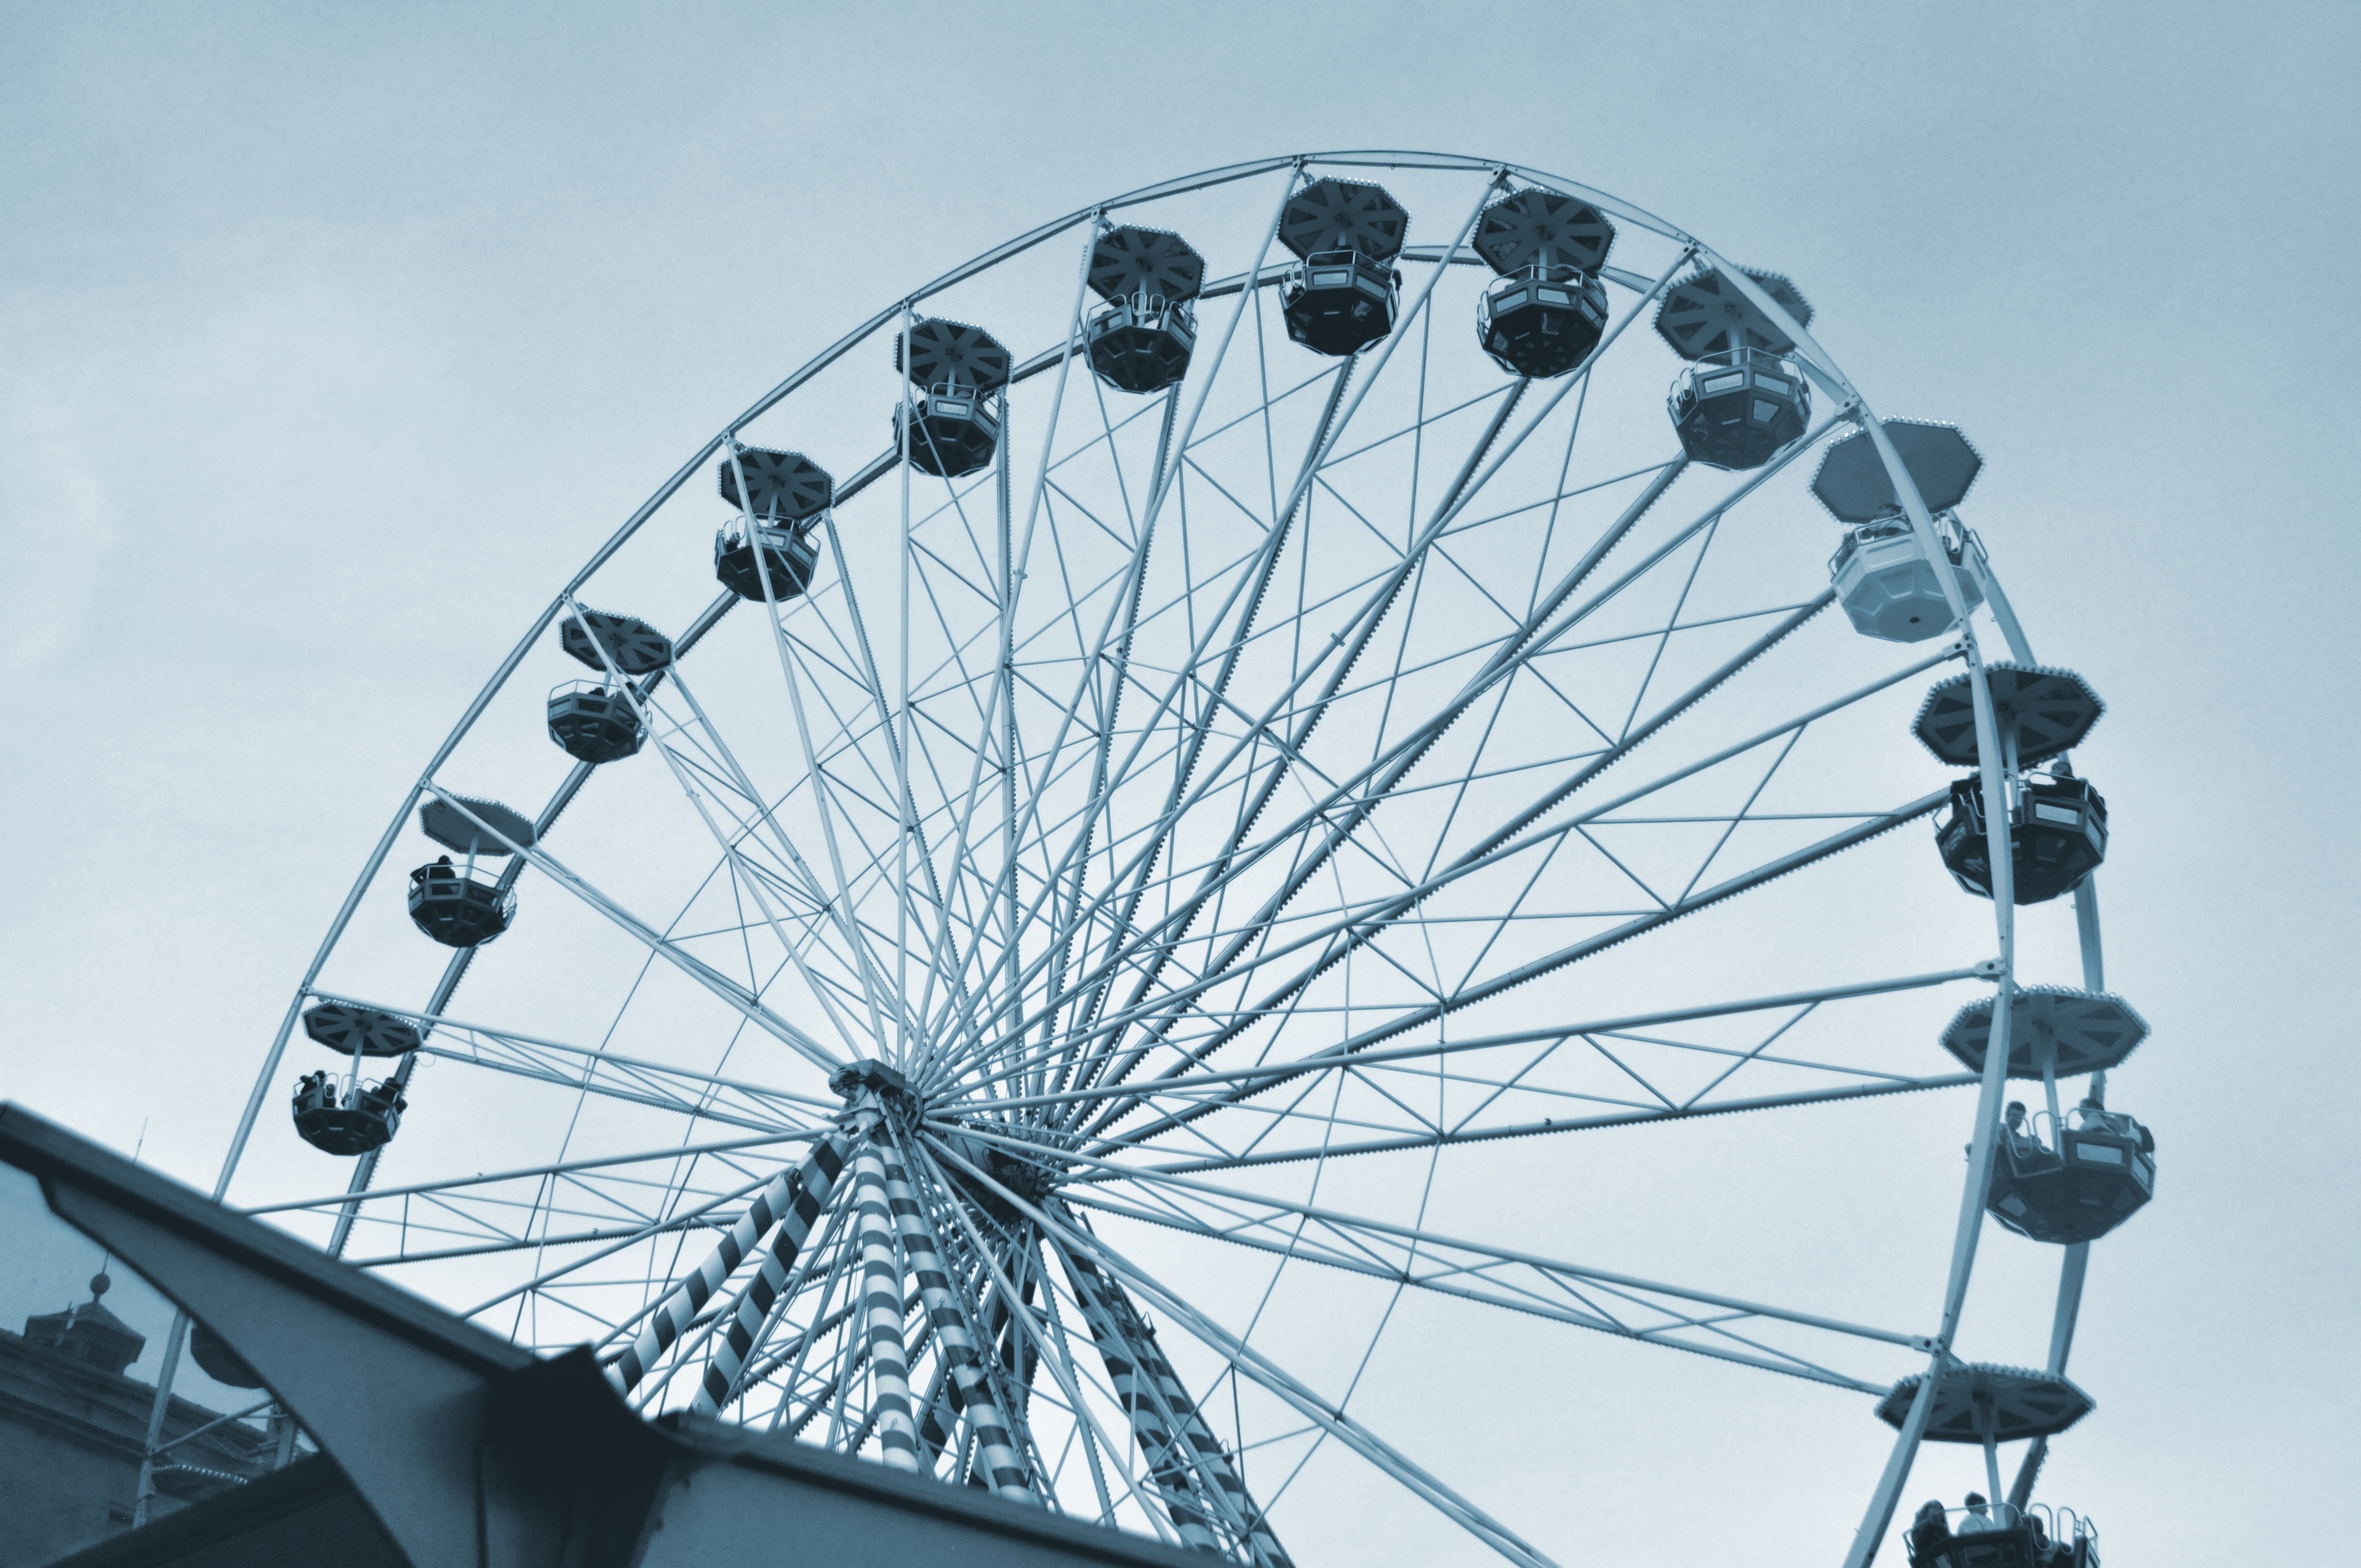 silver and gray ferris wheel